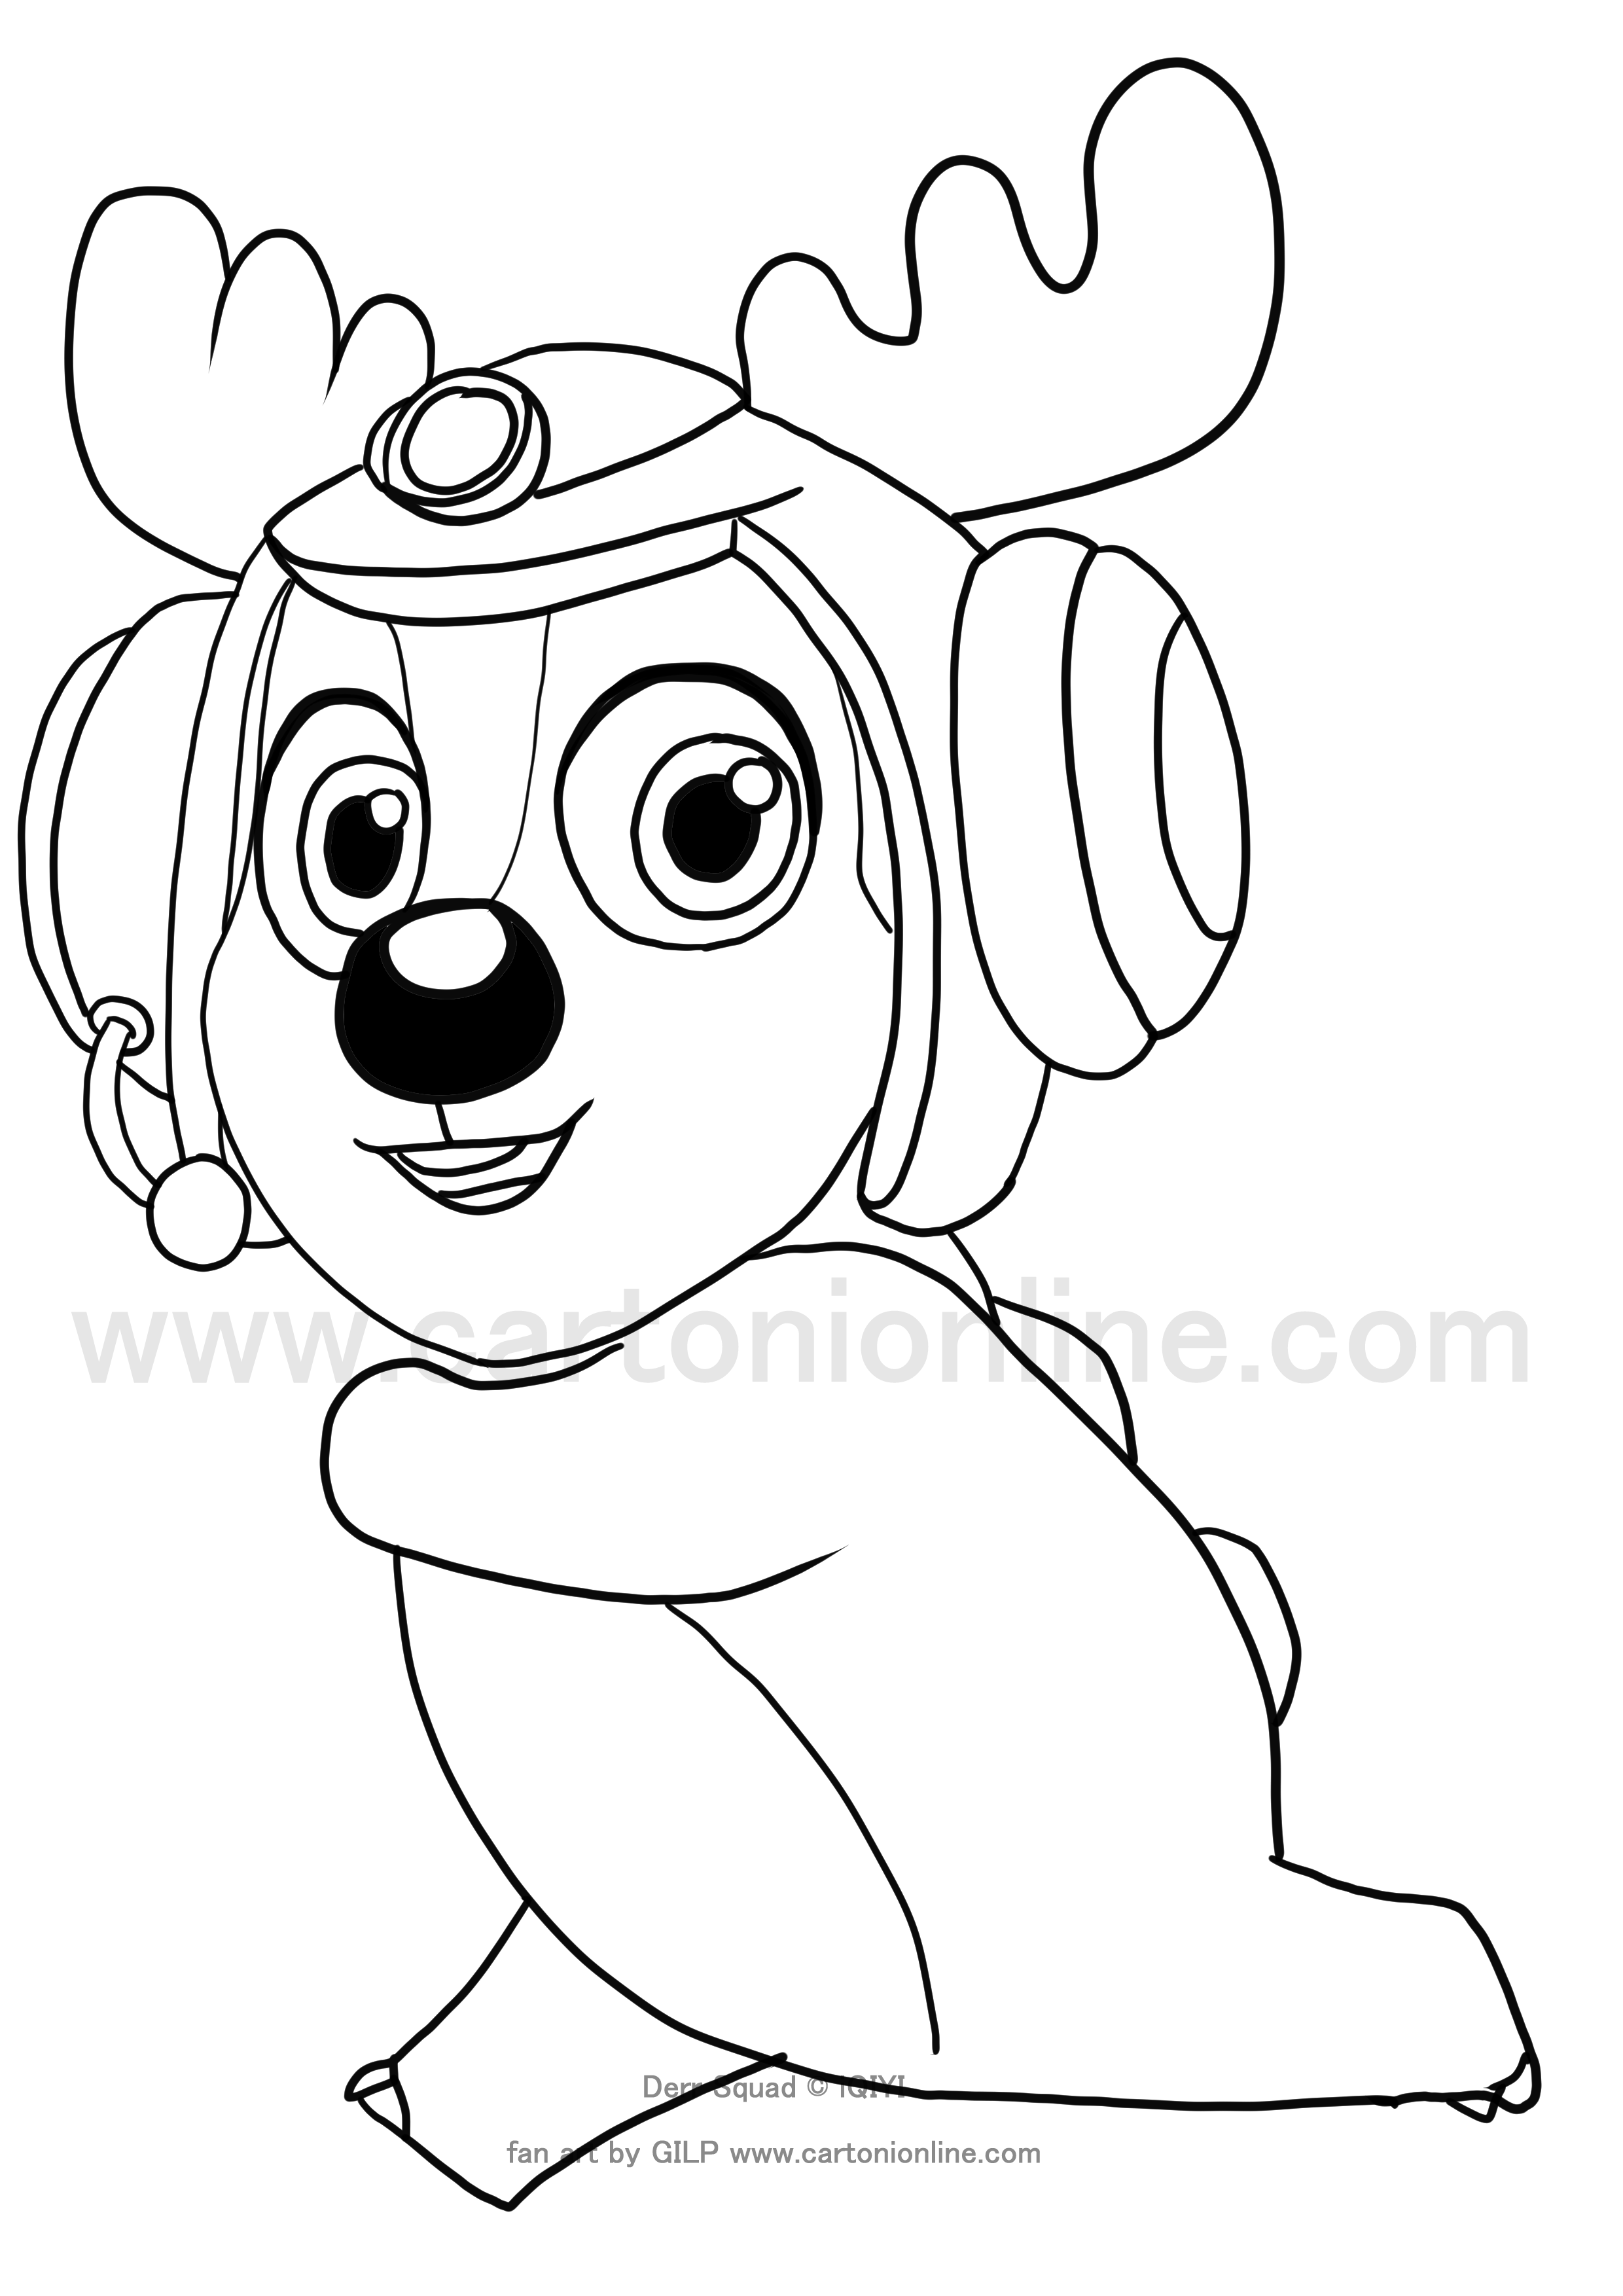 Bobbi Deer Squad coloring page to print and coloring